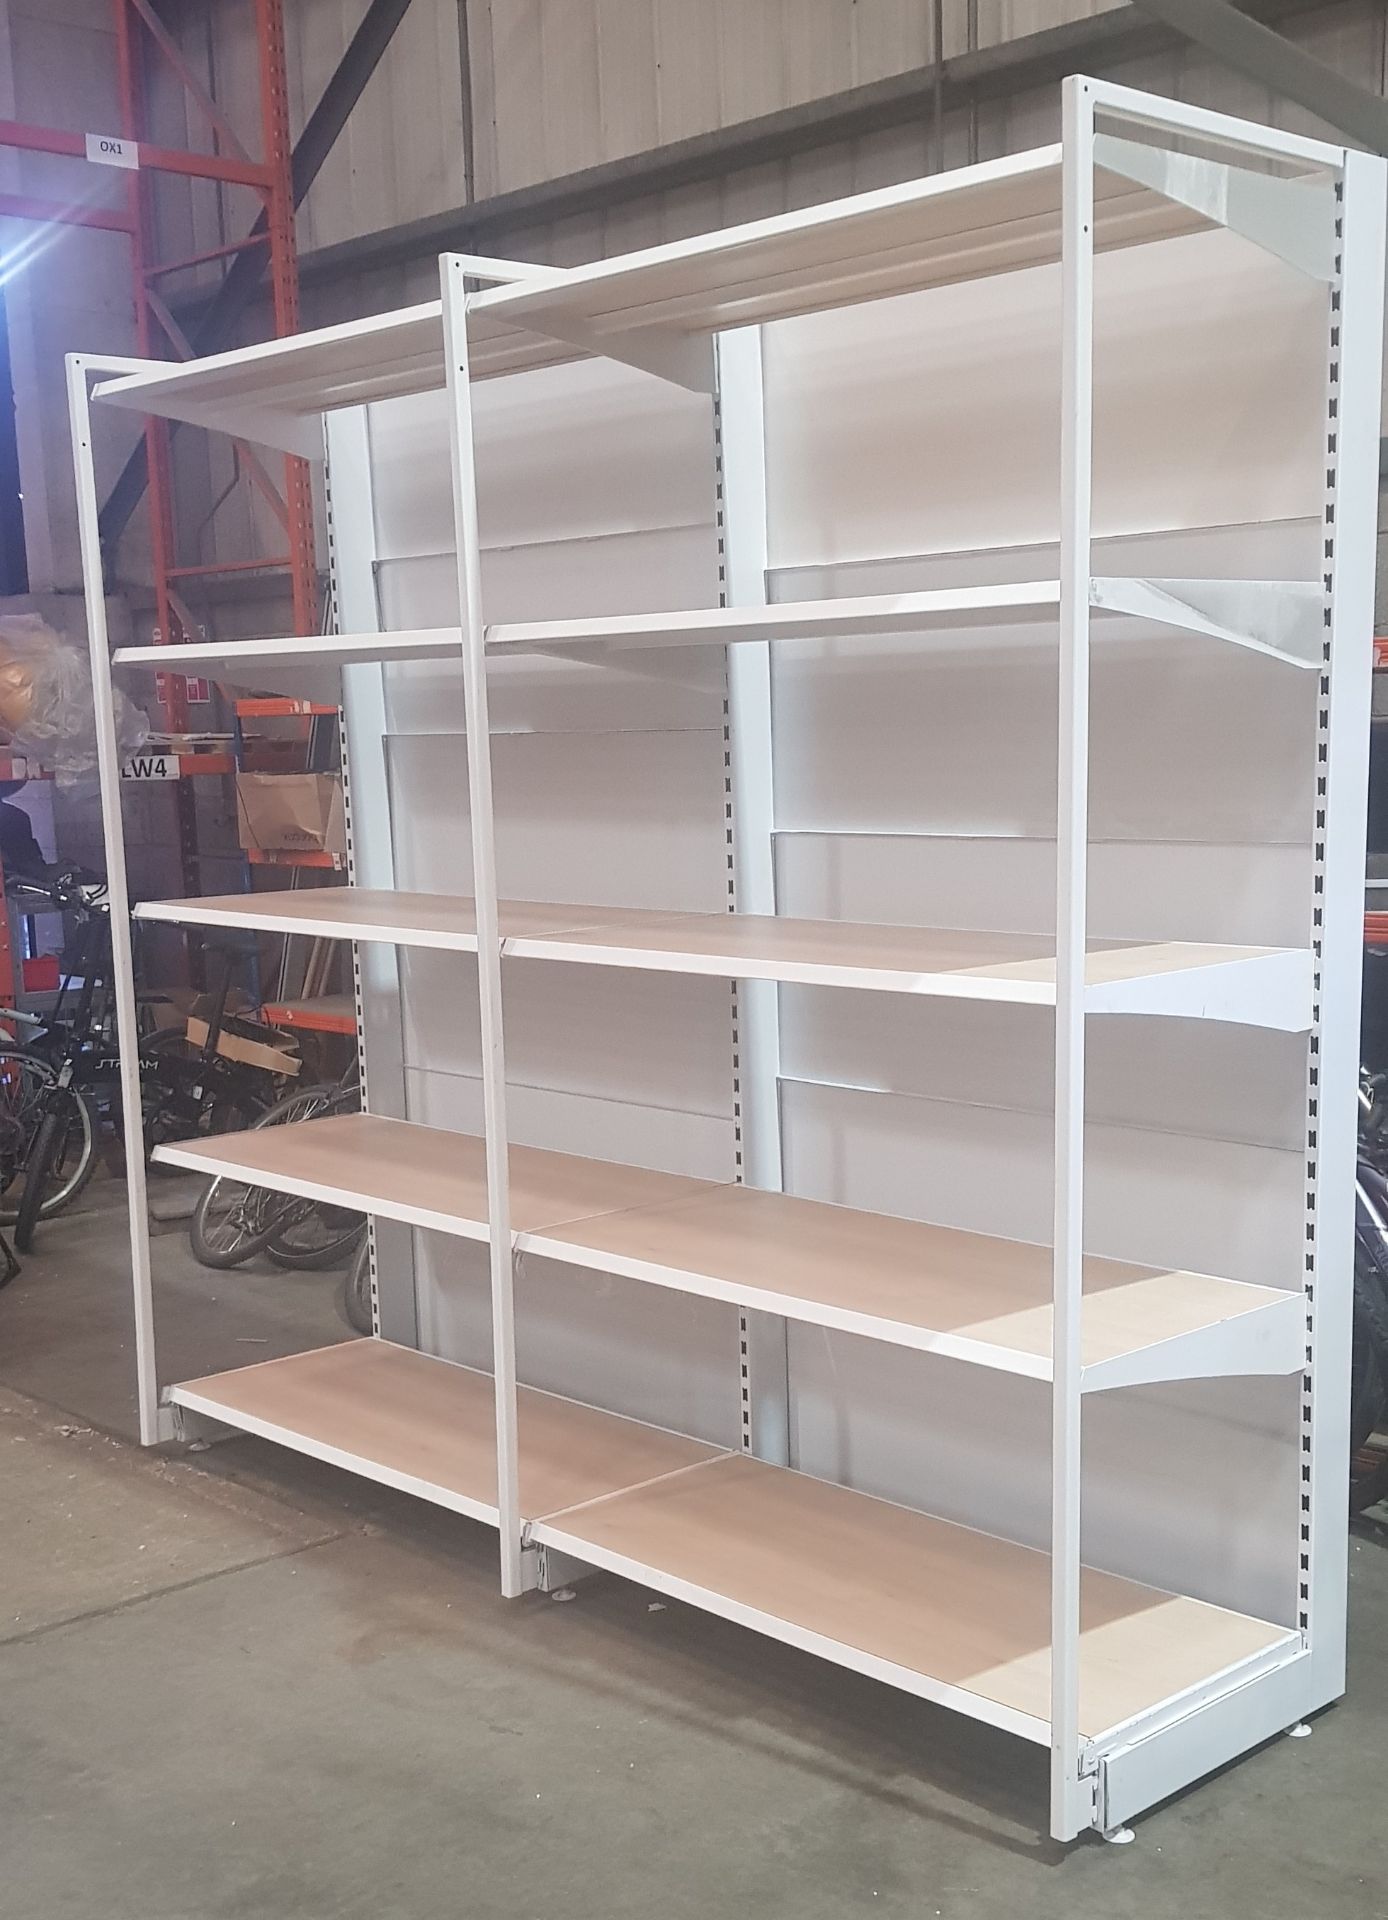 1 X 2 SECTION 5 TIER SHELVING UNIT (3m H x 2.55m W x 0.7m D) (3 UPRIGHT COLUMNS & 10 SHELVES WITH